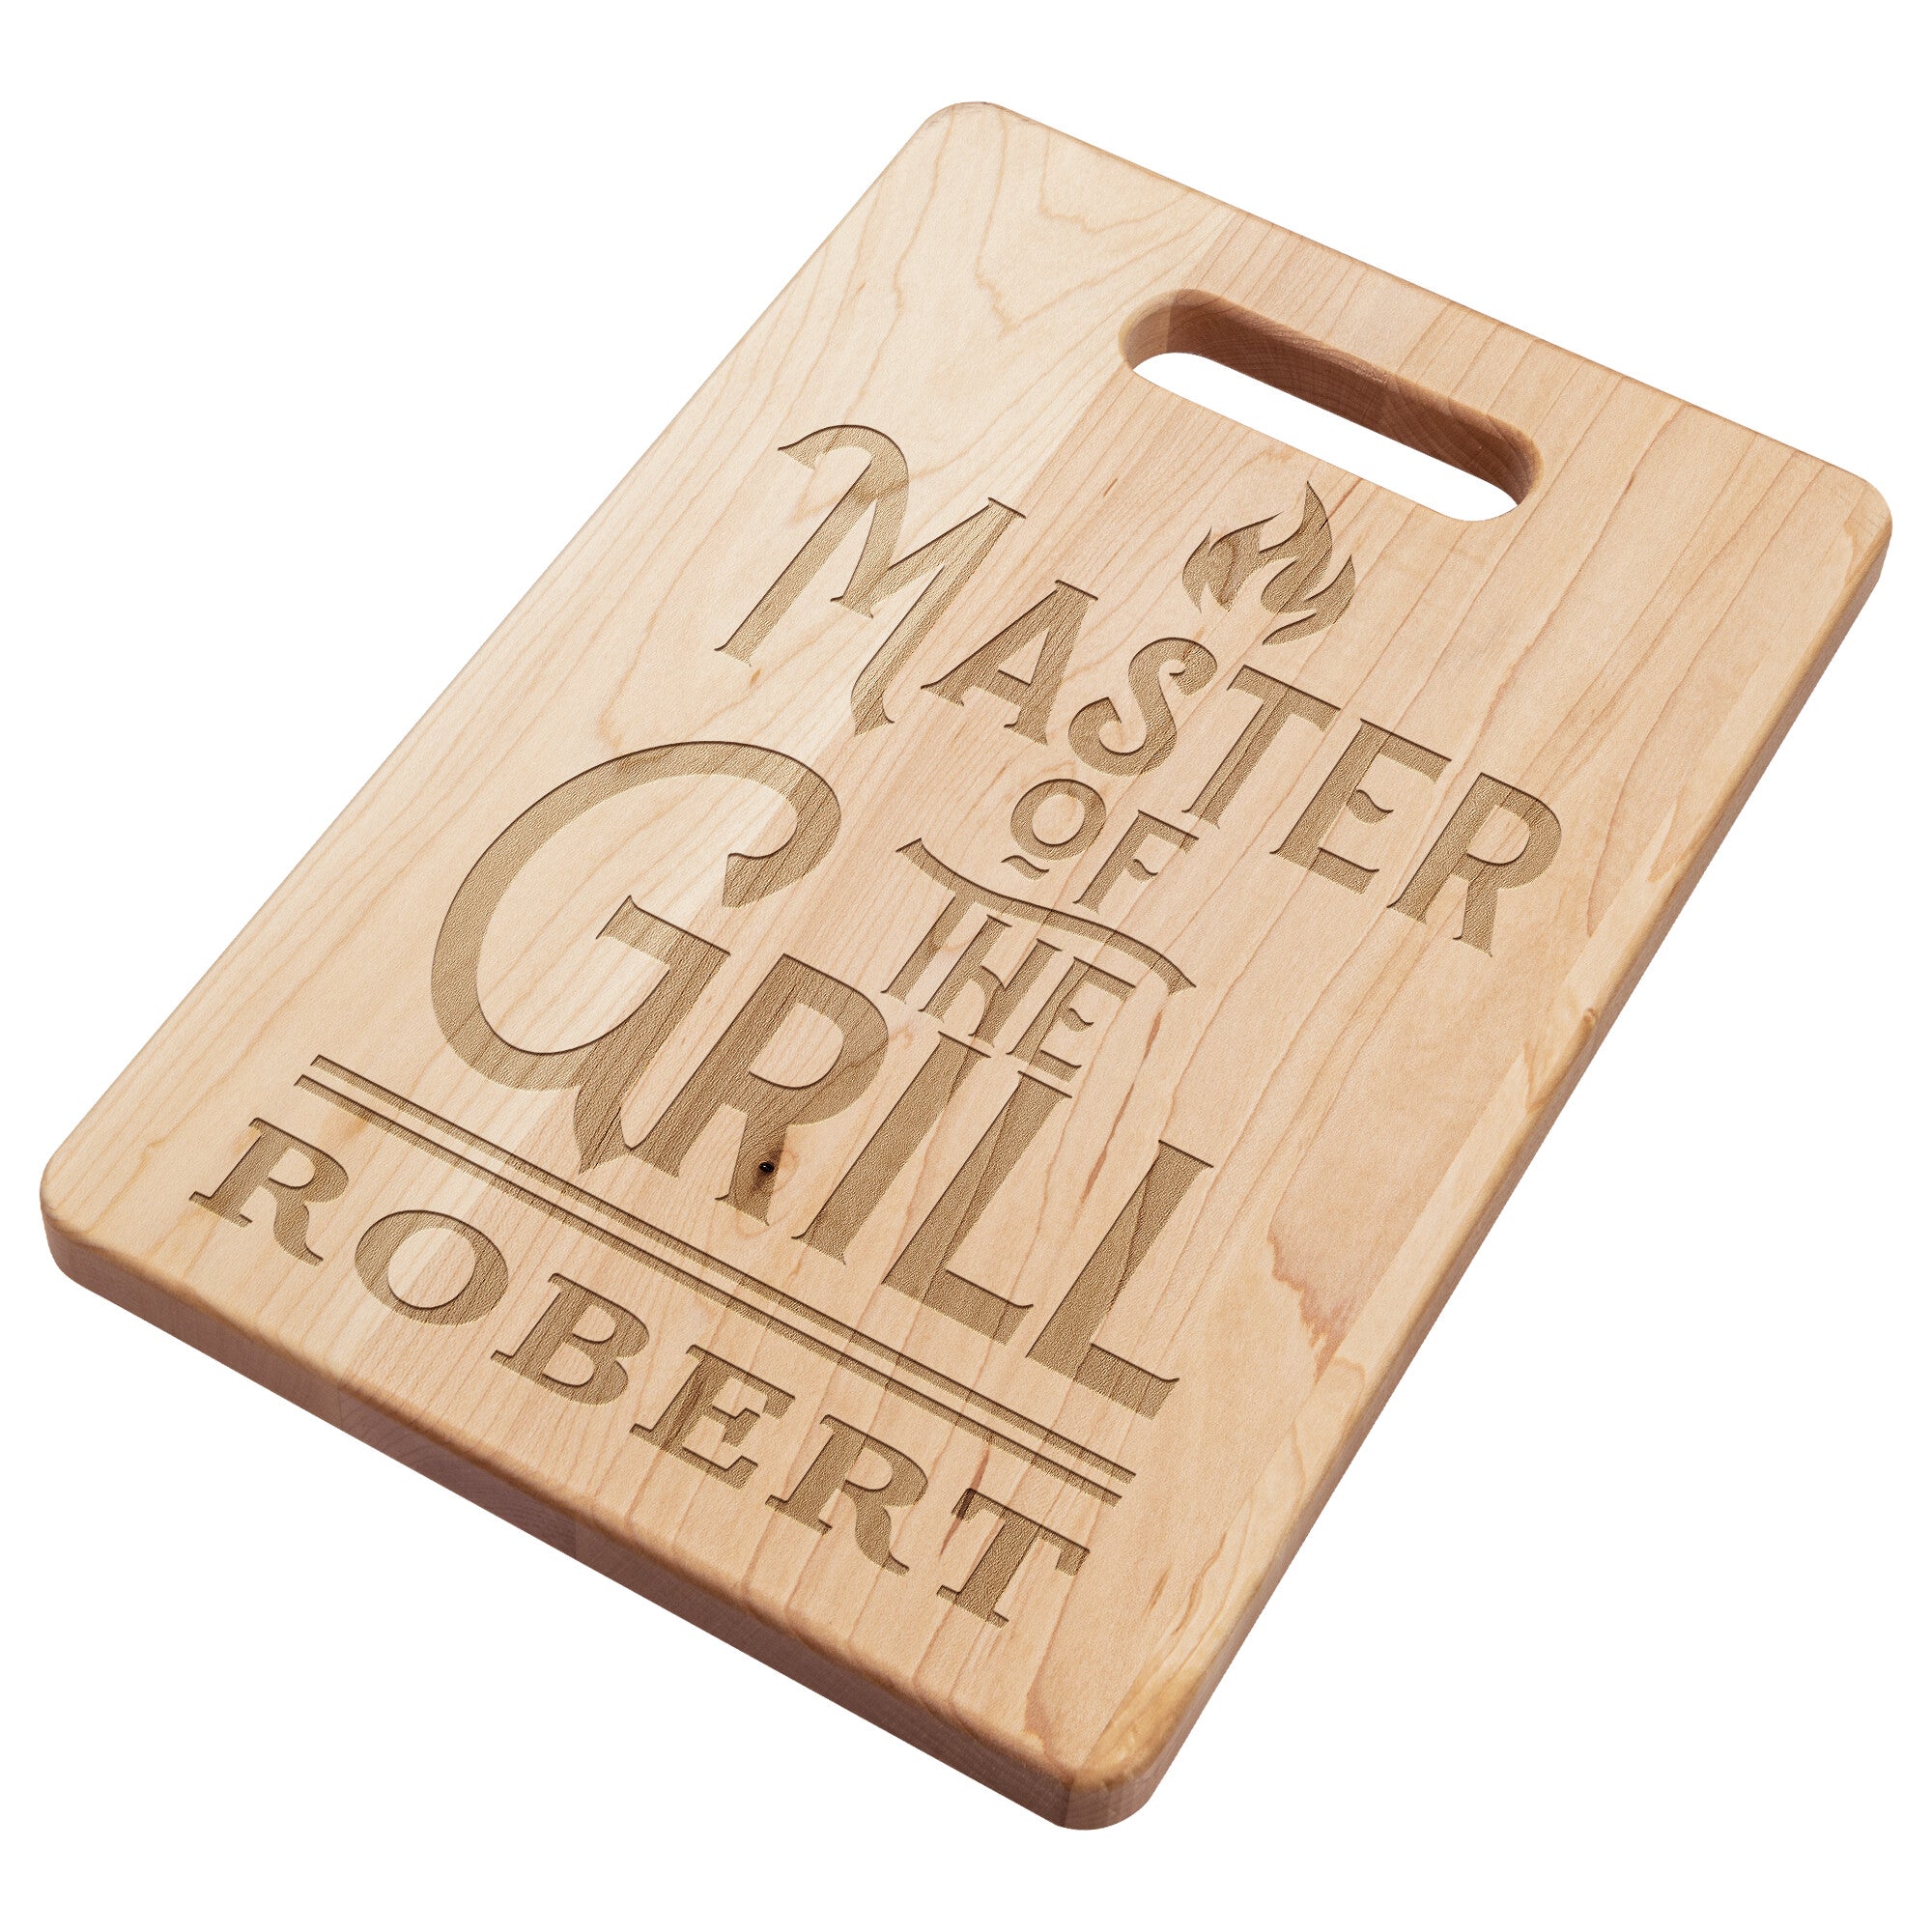 Personalized XL Maple Cutting Board - The Man, The Meat, The Legend